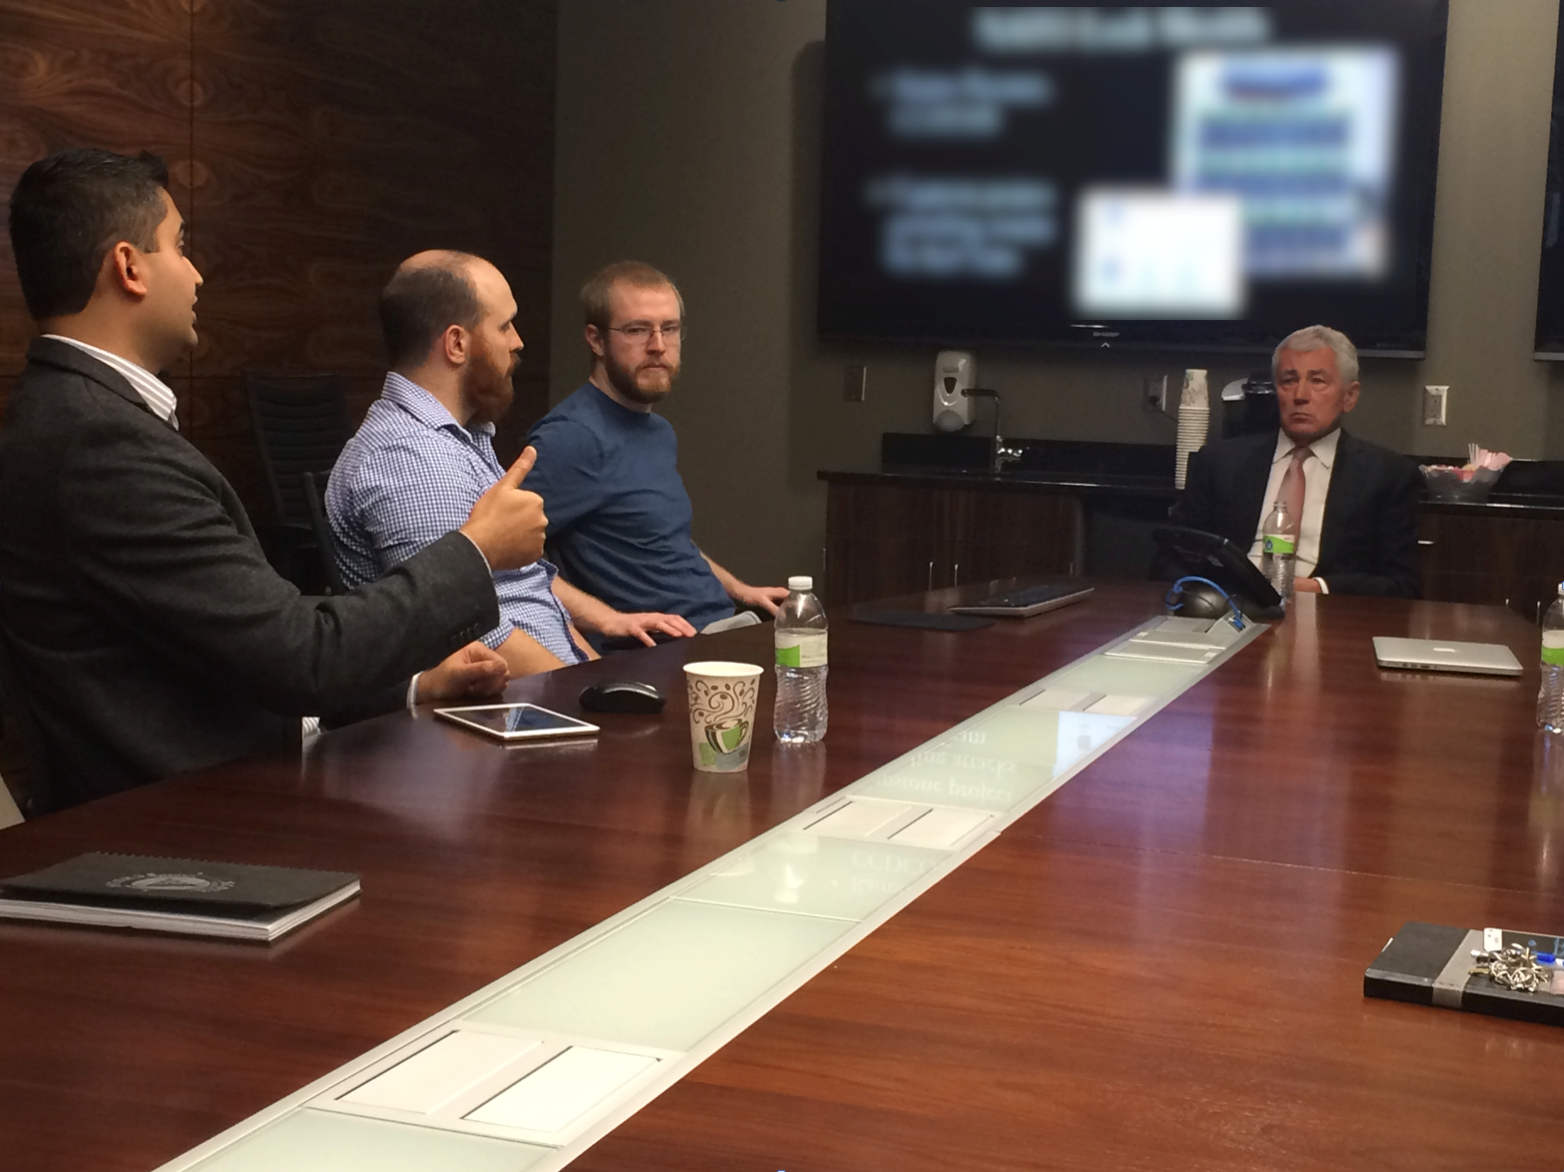 Faculty, students and Chuck Hagel sit around a conference table